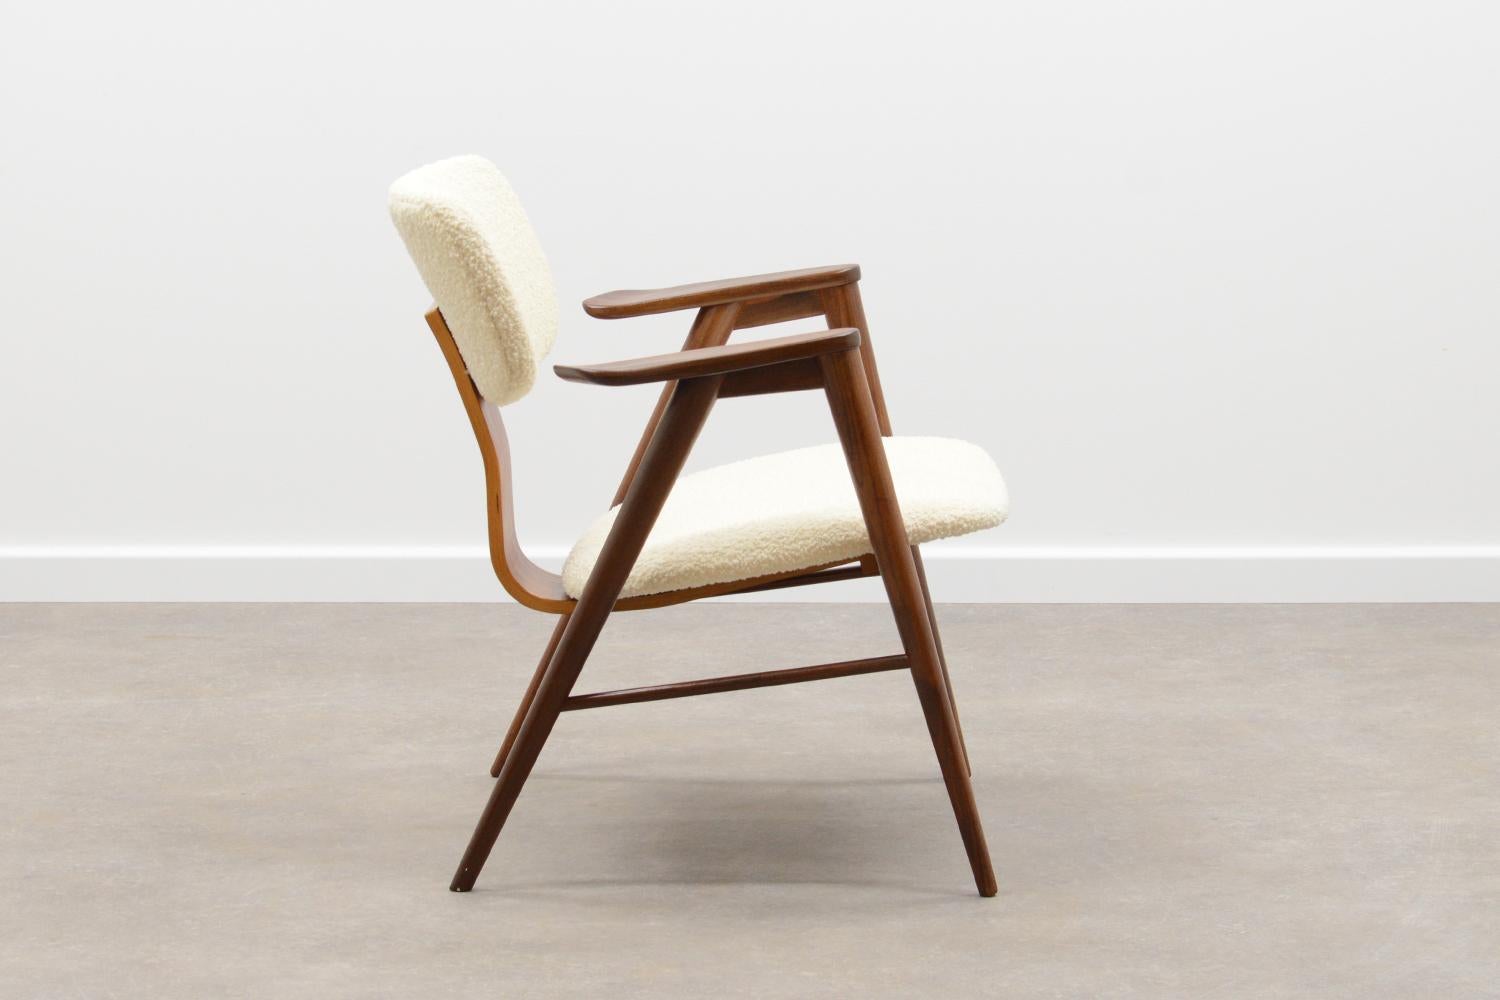 FB14 arm chair by Cees Braakman for Pastoe 50s. Solid teak frame and reupholstered in a cream color bouclé by Bisson Bruneel. In very good vintage condition. 

